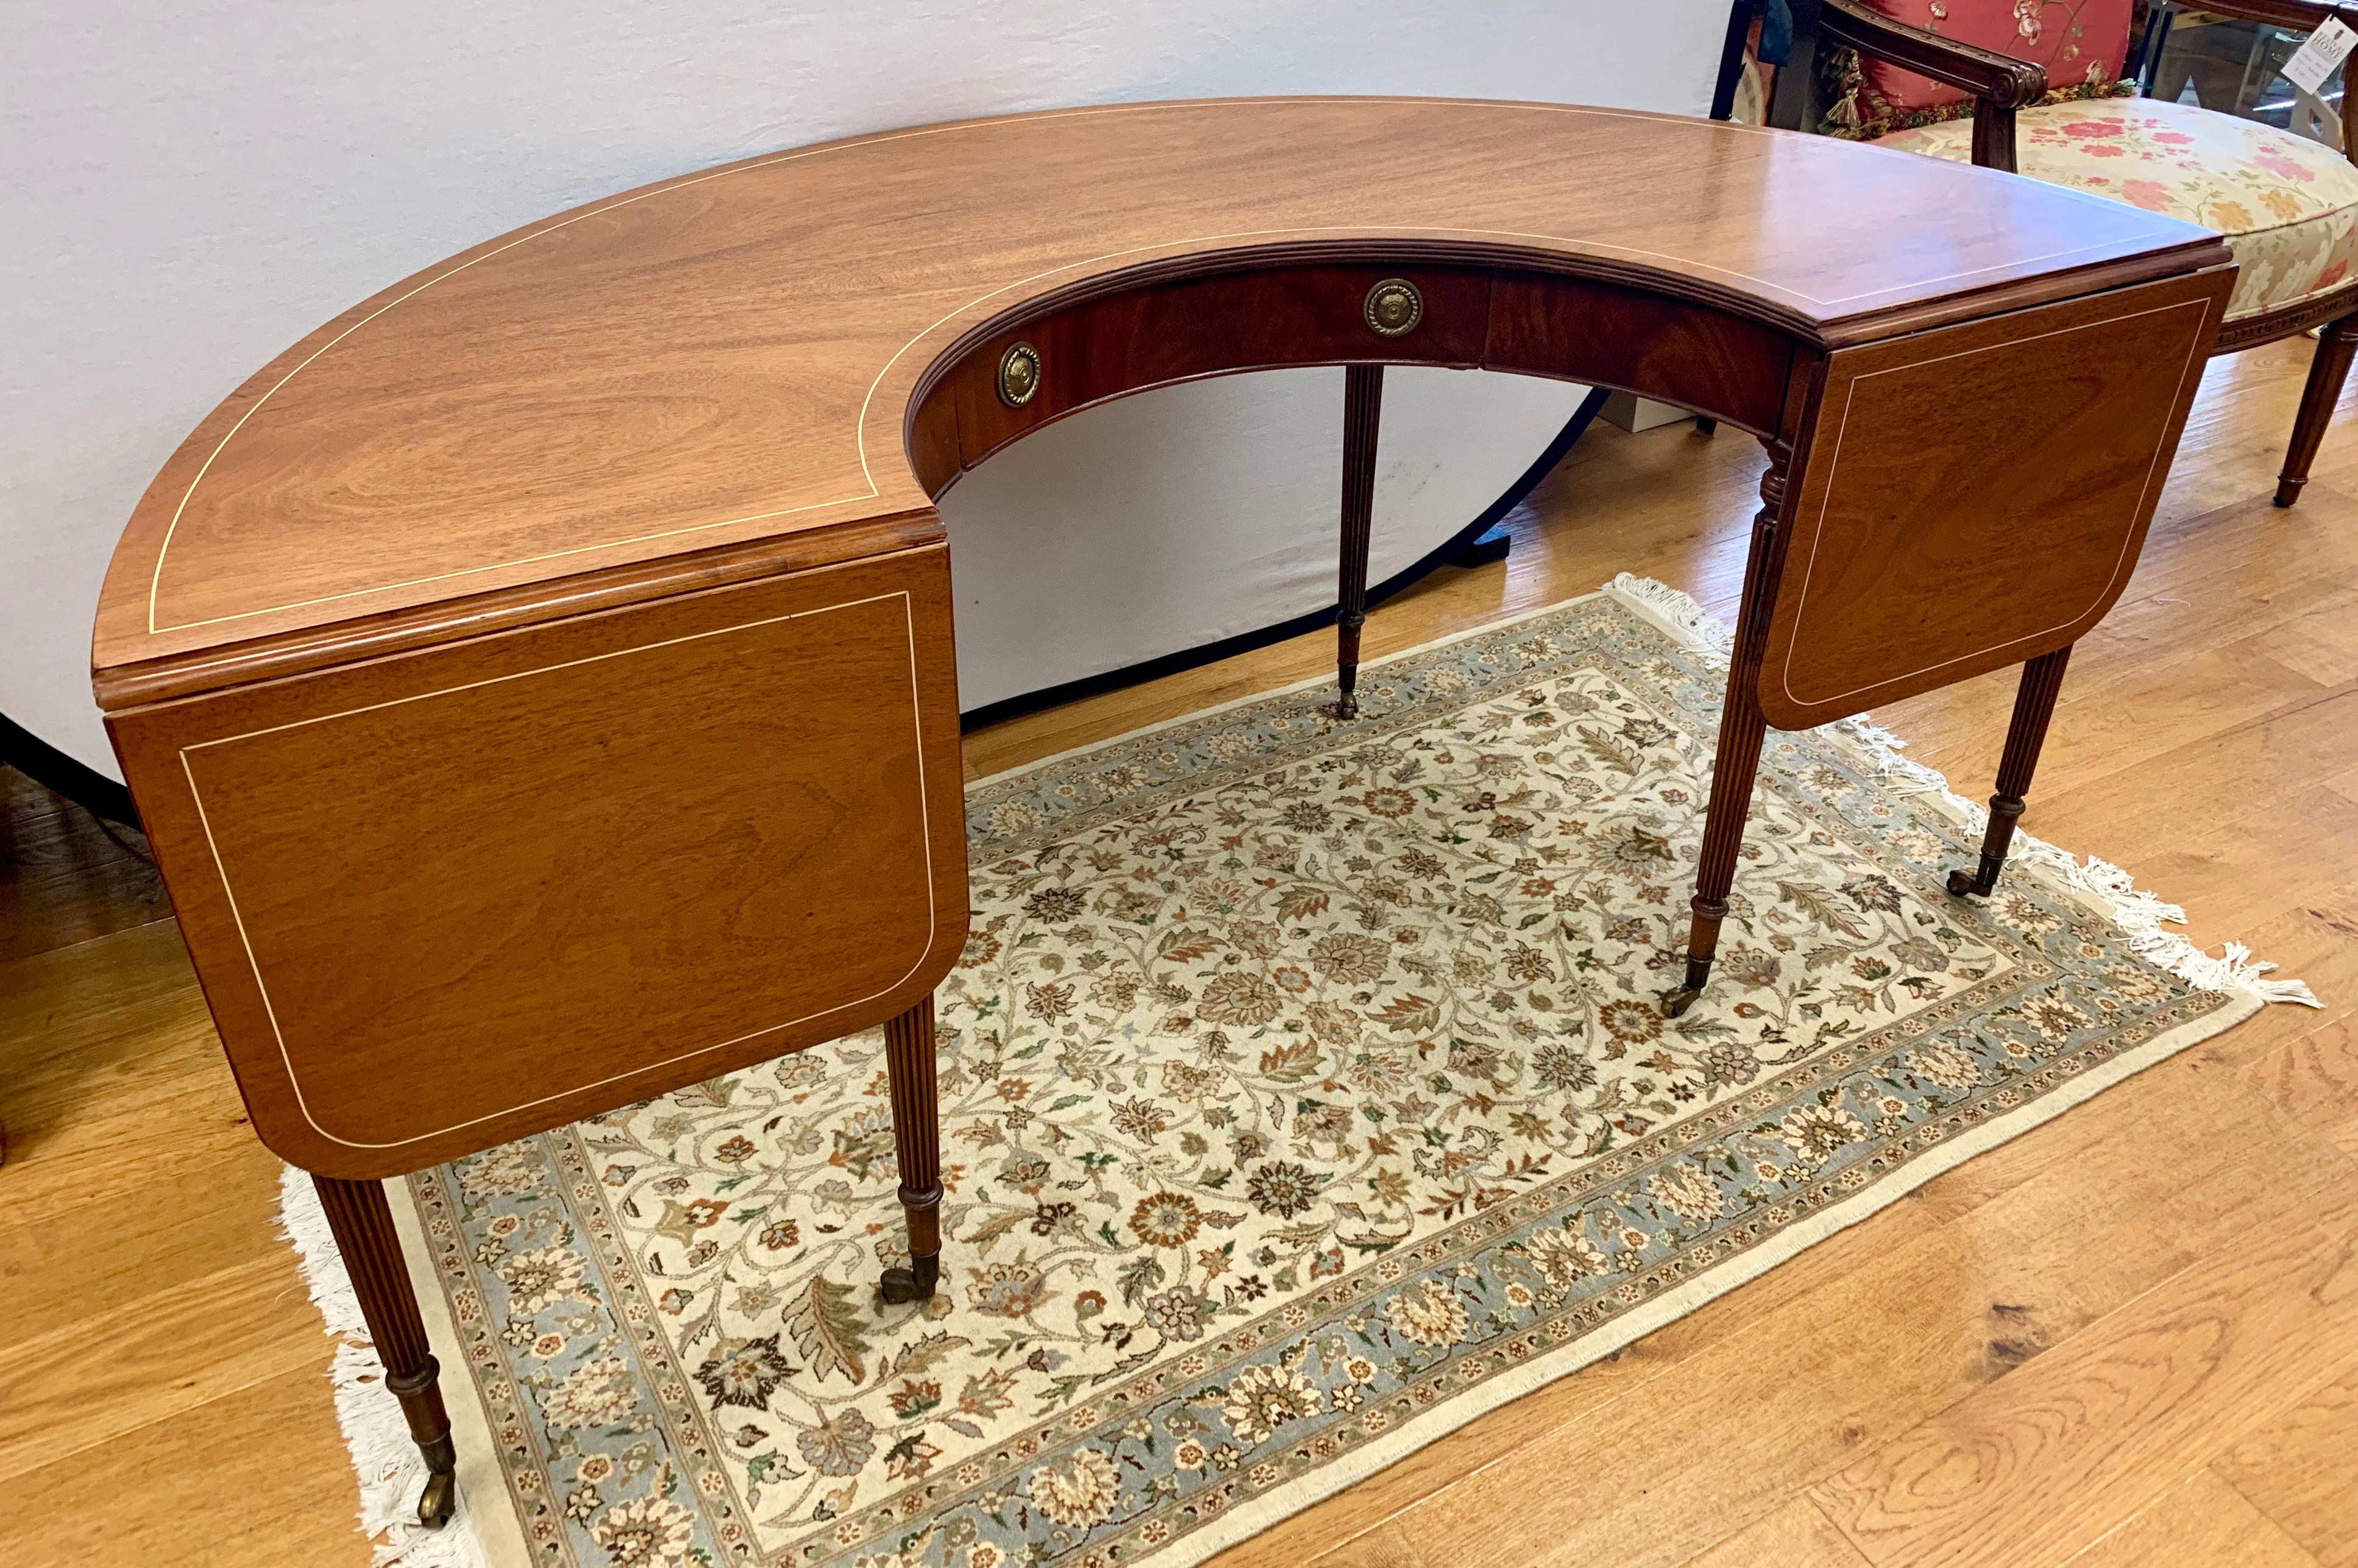 Elegant social mahogany hunt table with half-moon shaped top extendable ends and center drawer. It rests on fluted legs with castors for ease of movement. The dimensions listed below are with the ends folded down. When they are up, add an additional